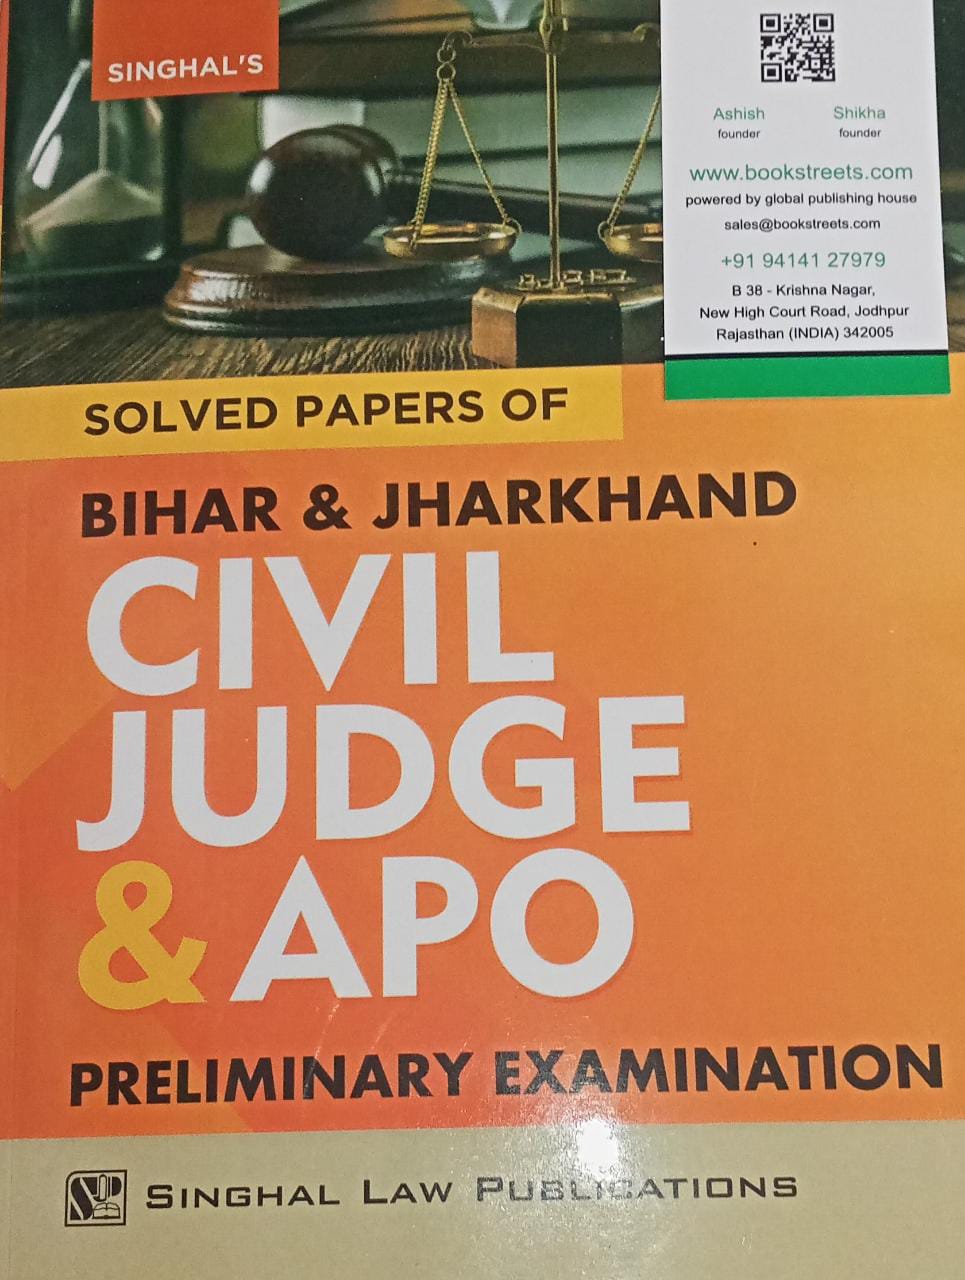 Singh's Solved Paper of Bihar and Jharkhand Civil Judge & APO by Singhal Law Publication